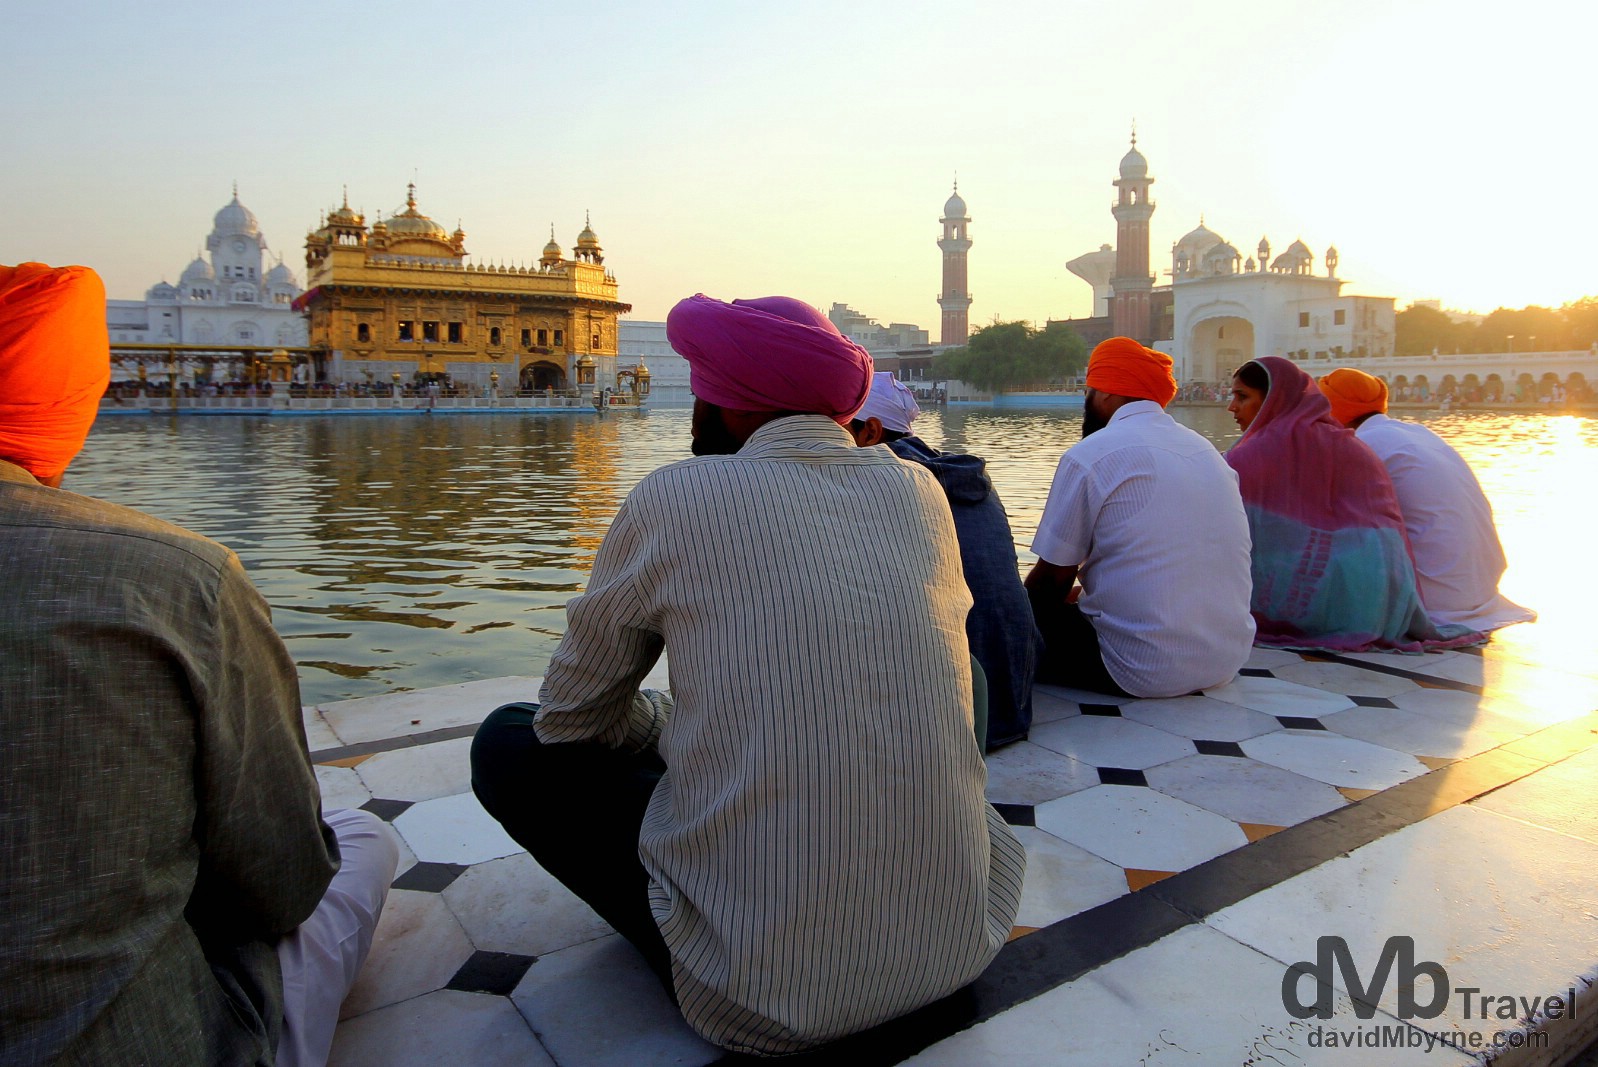 Sitting by the Amrit Sarovar (Pool of Nectar) at sunrise at the Golden Temple, Amritsar, India. October 9th 2012.